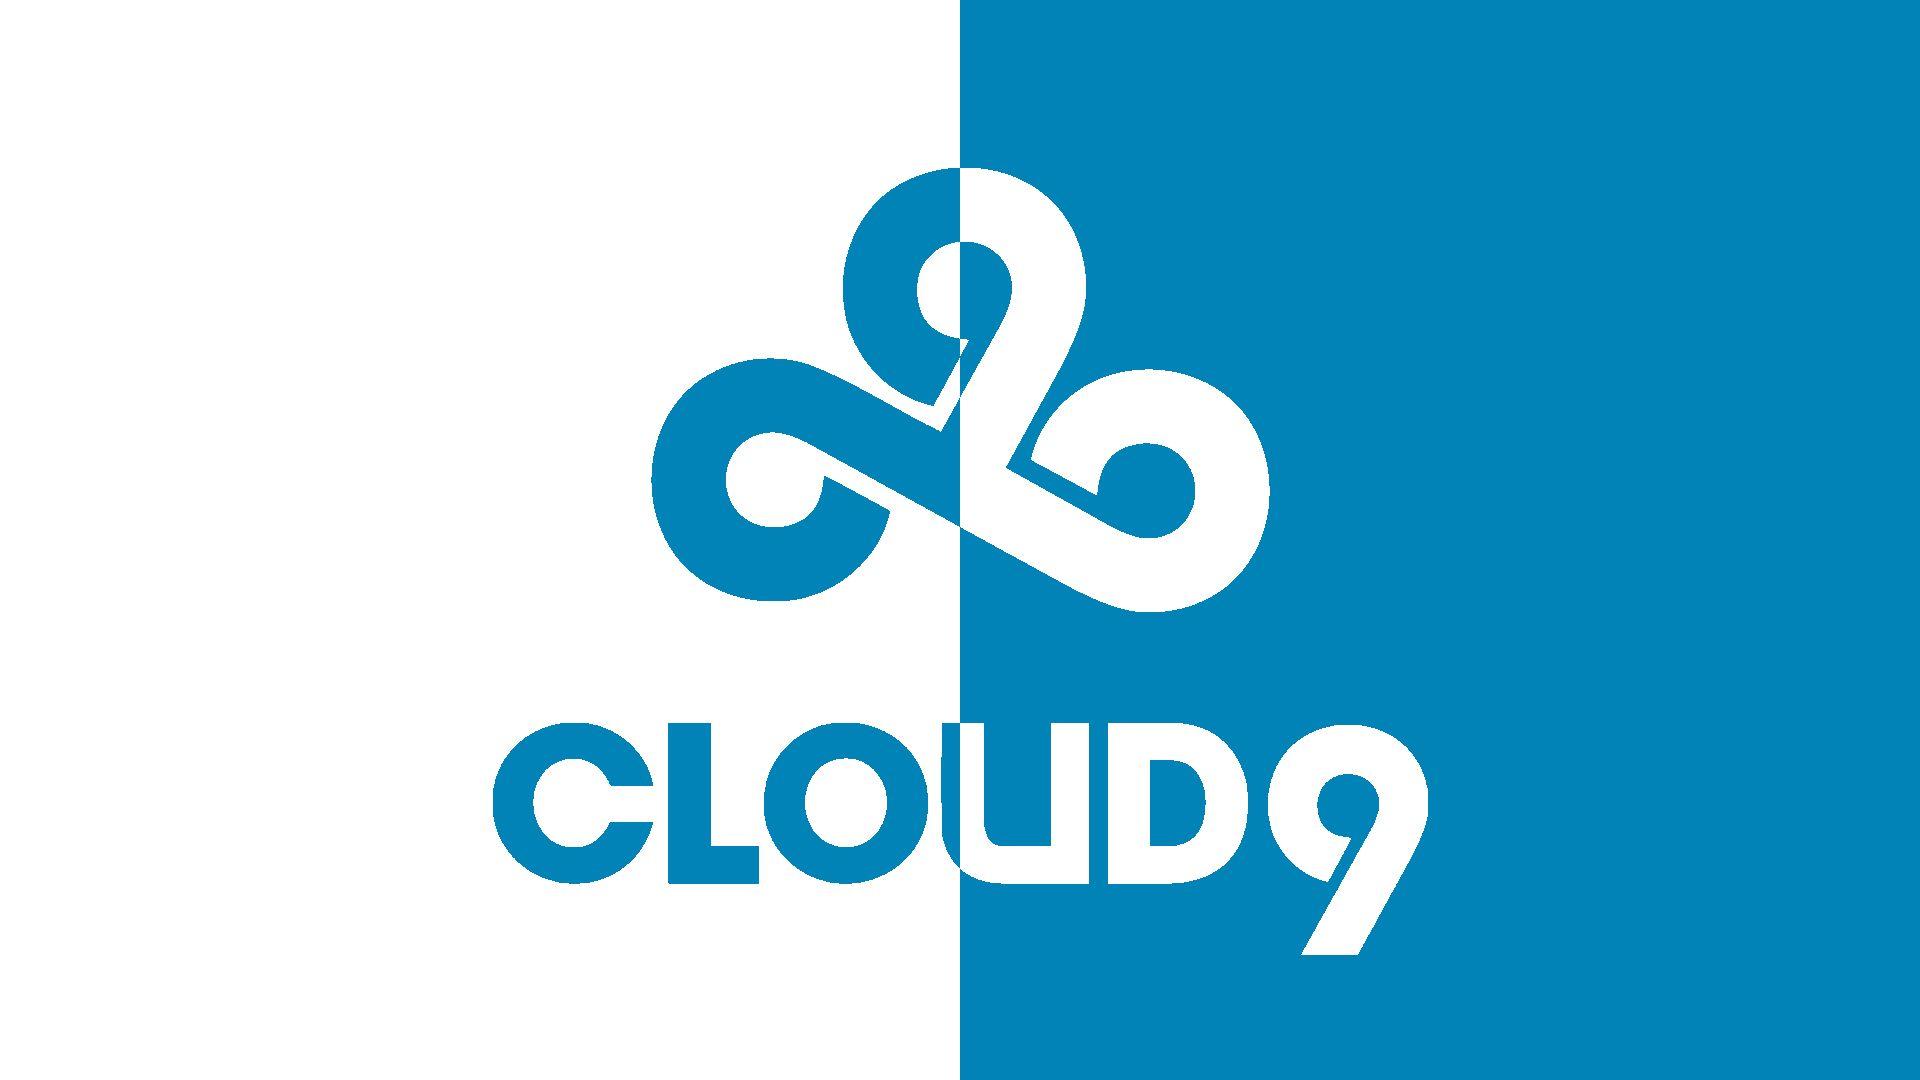 C9 Logo - Made myself a C9 wallpaper like the NiP one posted earlier #games